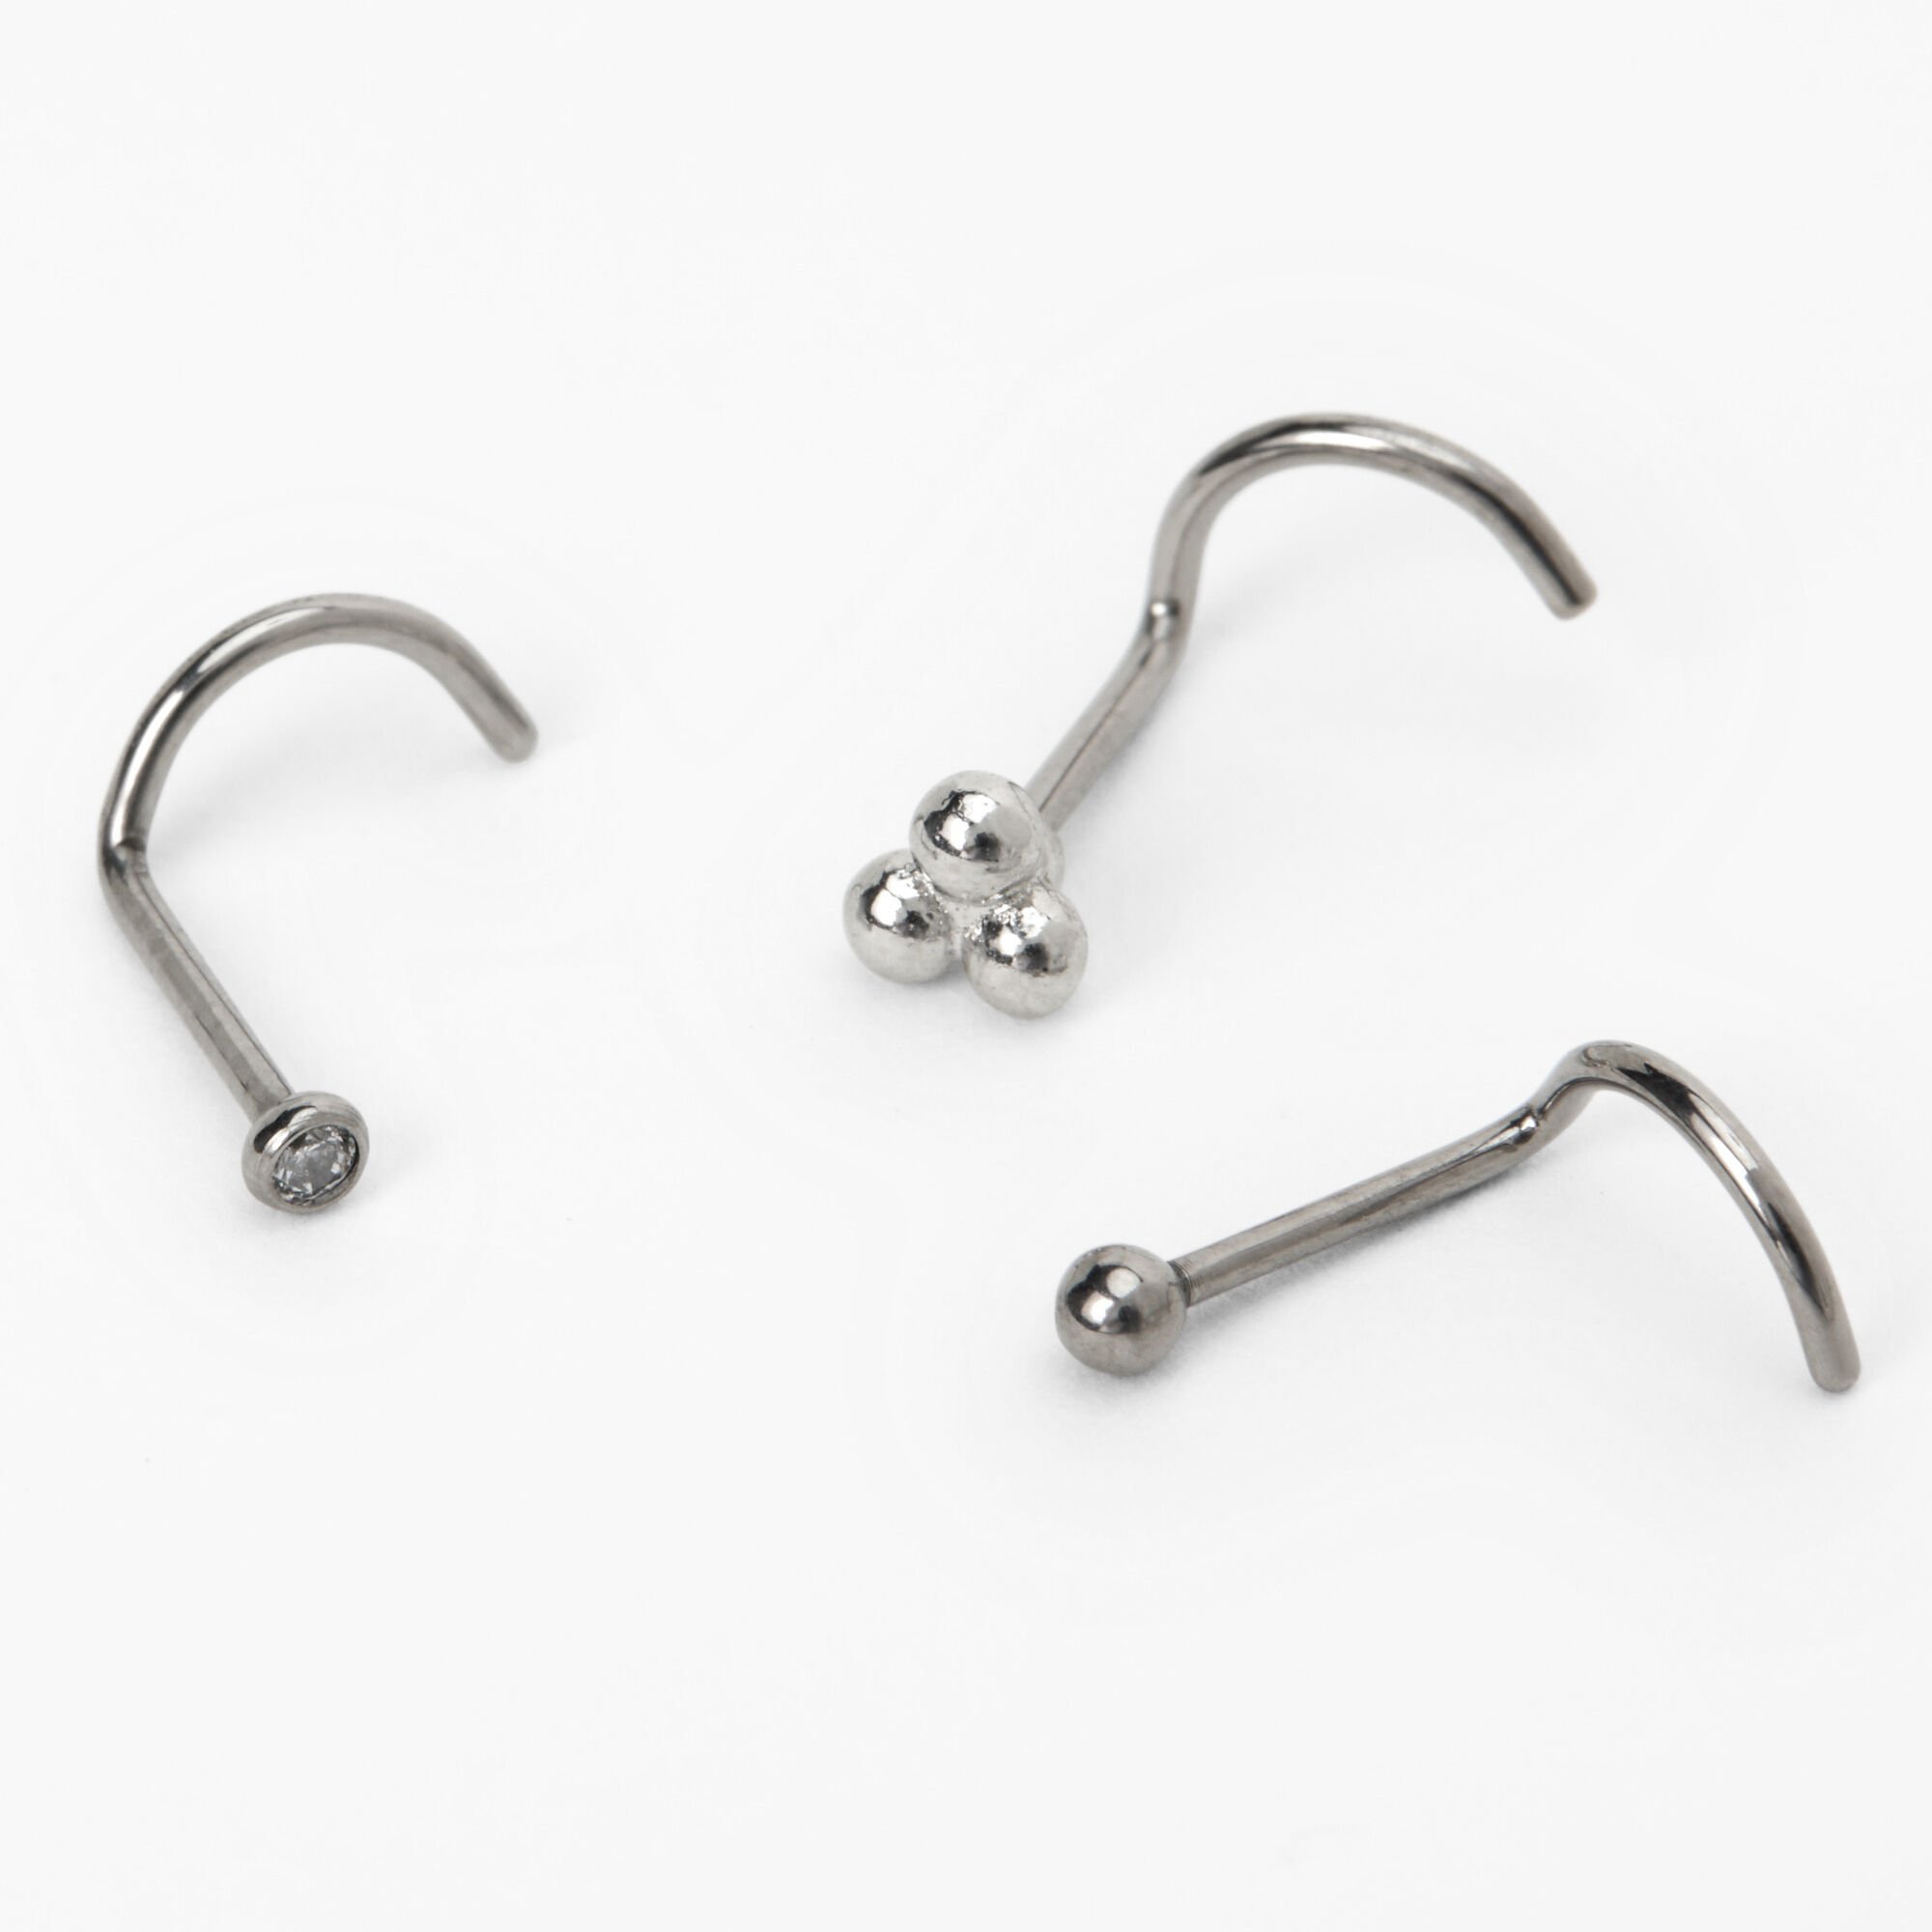 View Claires Tone Titanium 20G Round Ball Nose Studs 3 Pack Silver information